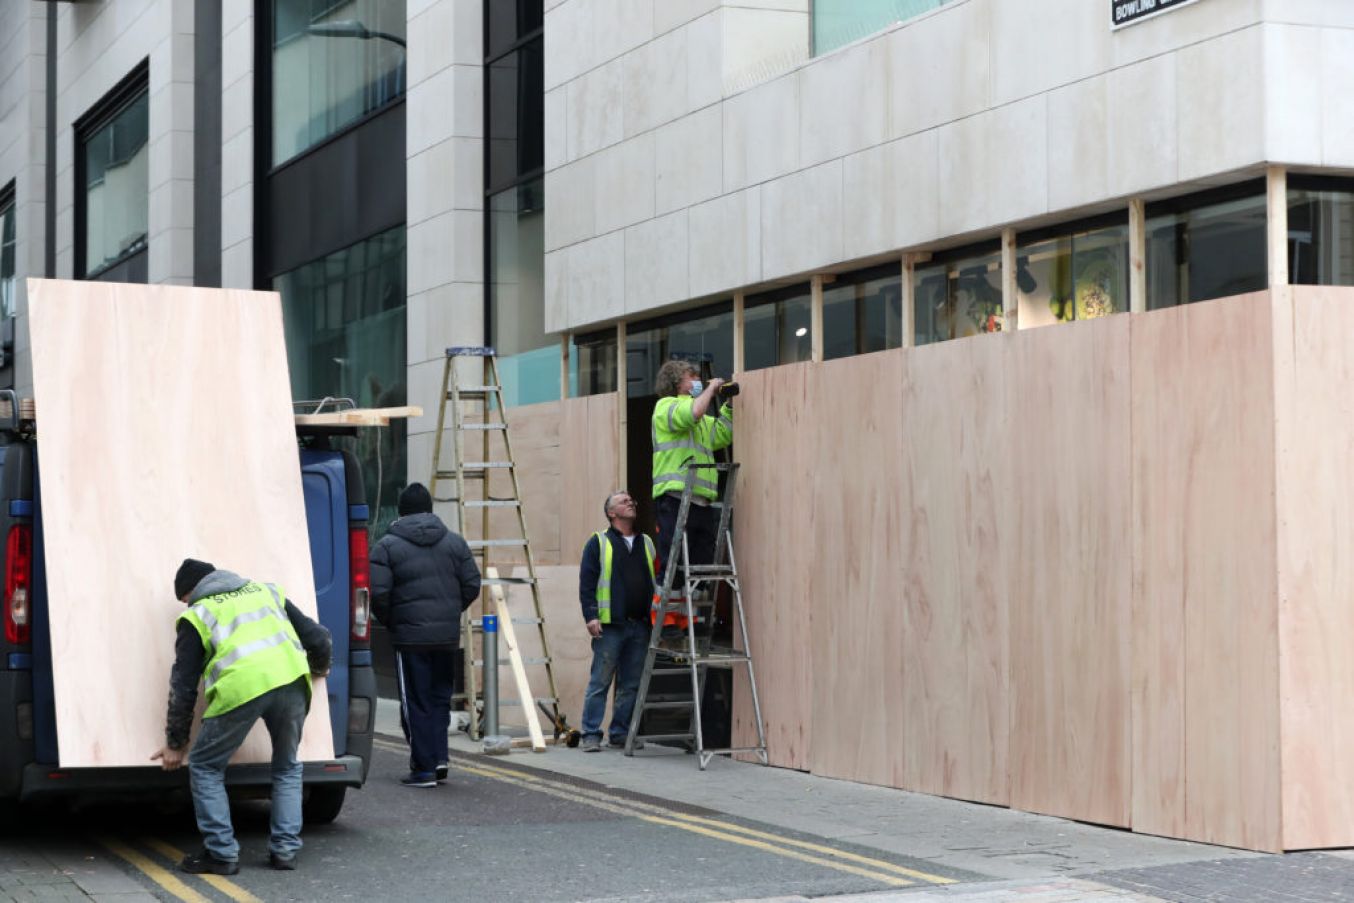 A Store In Cork Boards Up Its Windows Ahead Of The Demonstration. Photo: Pa Images.